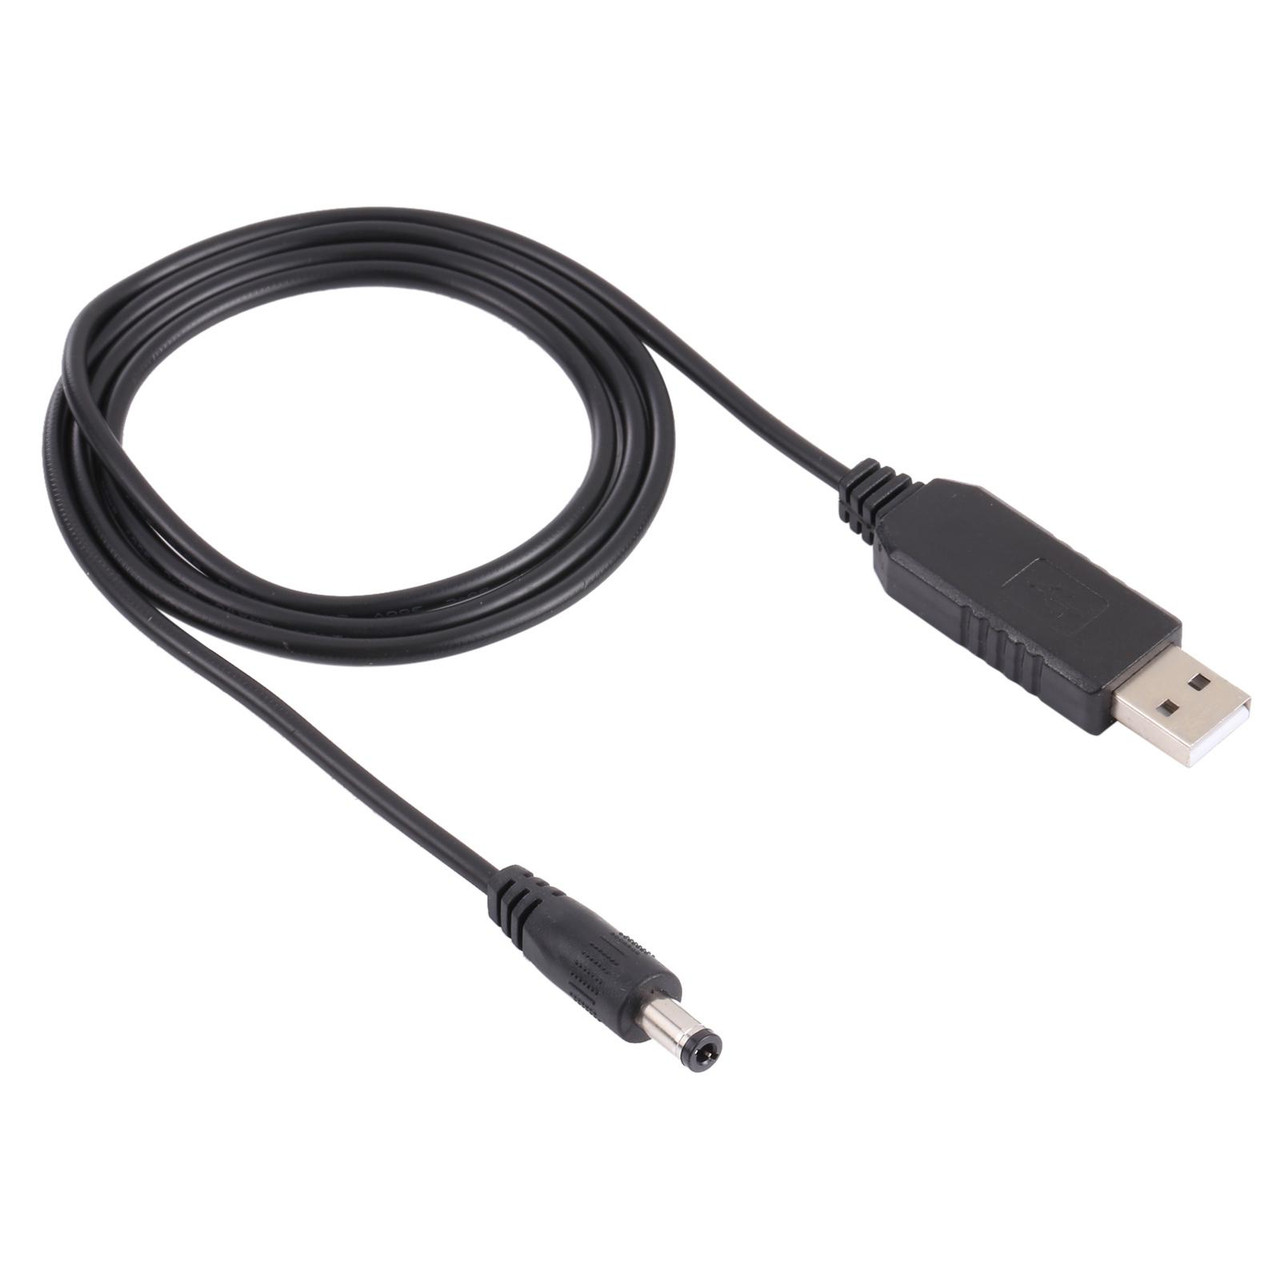 LDO-888 USB Power Boost Cable 5V to 12V - Botway